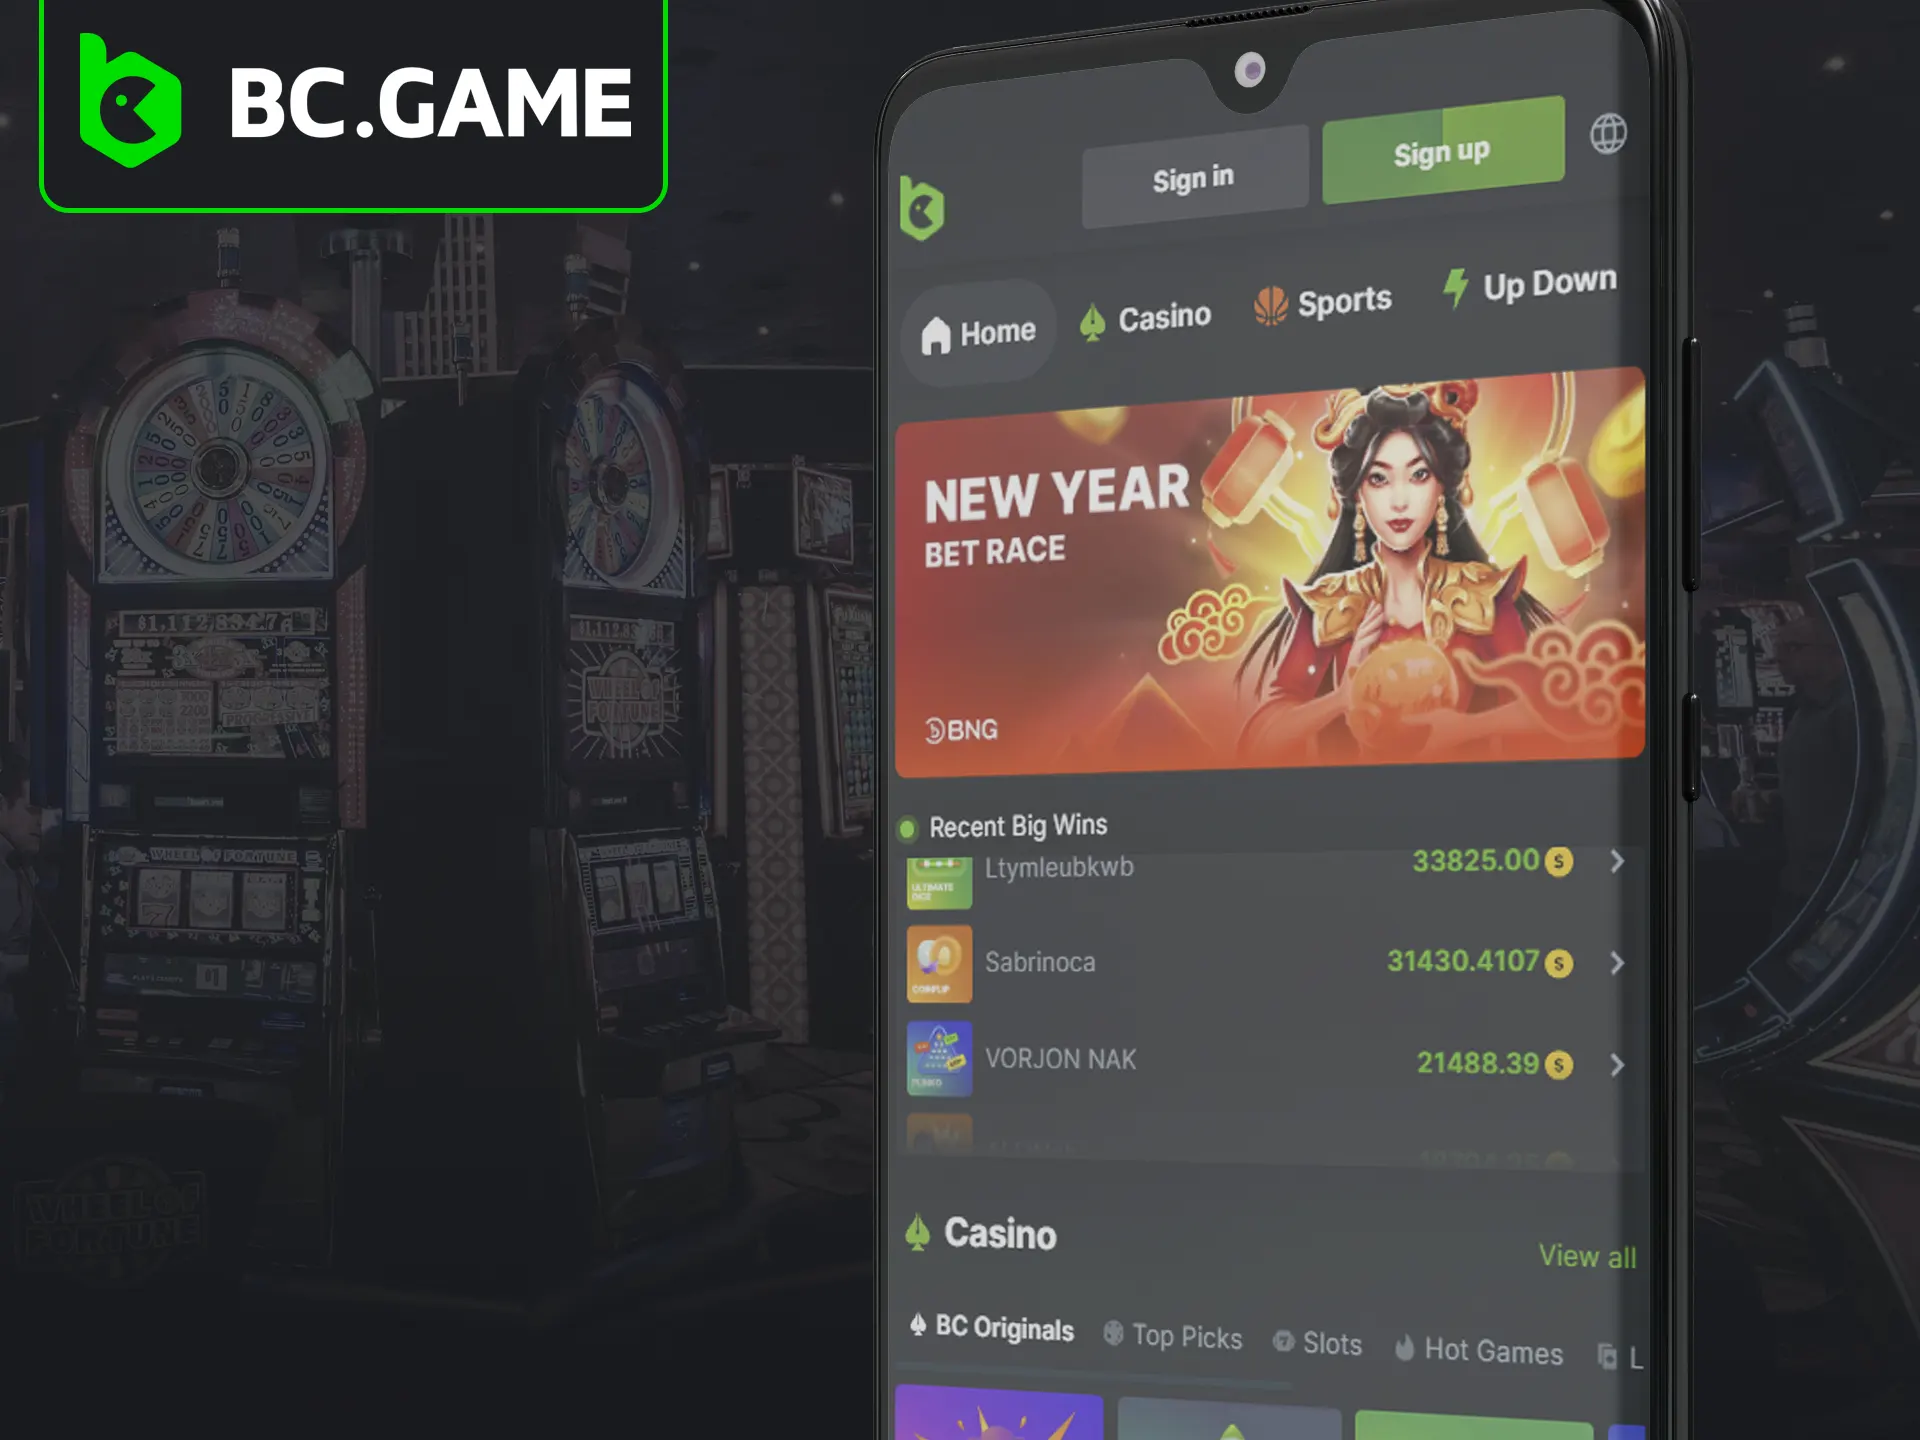 Access BC Game mobile website for convenient betting.